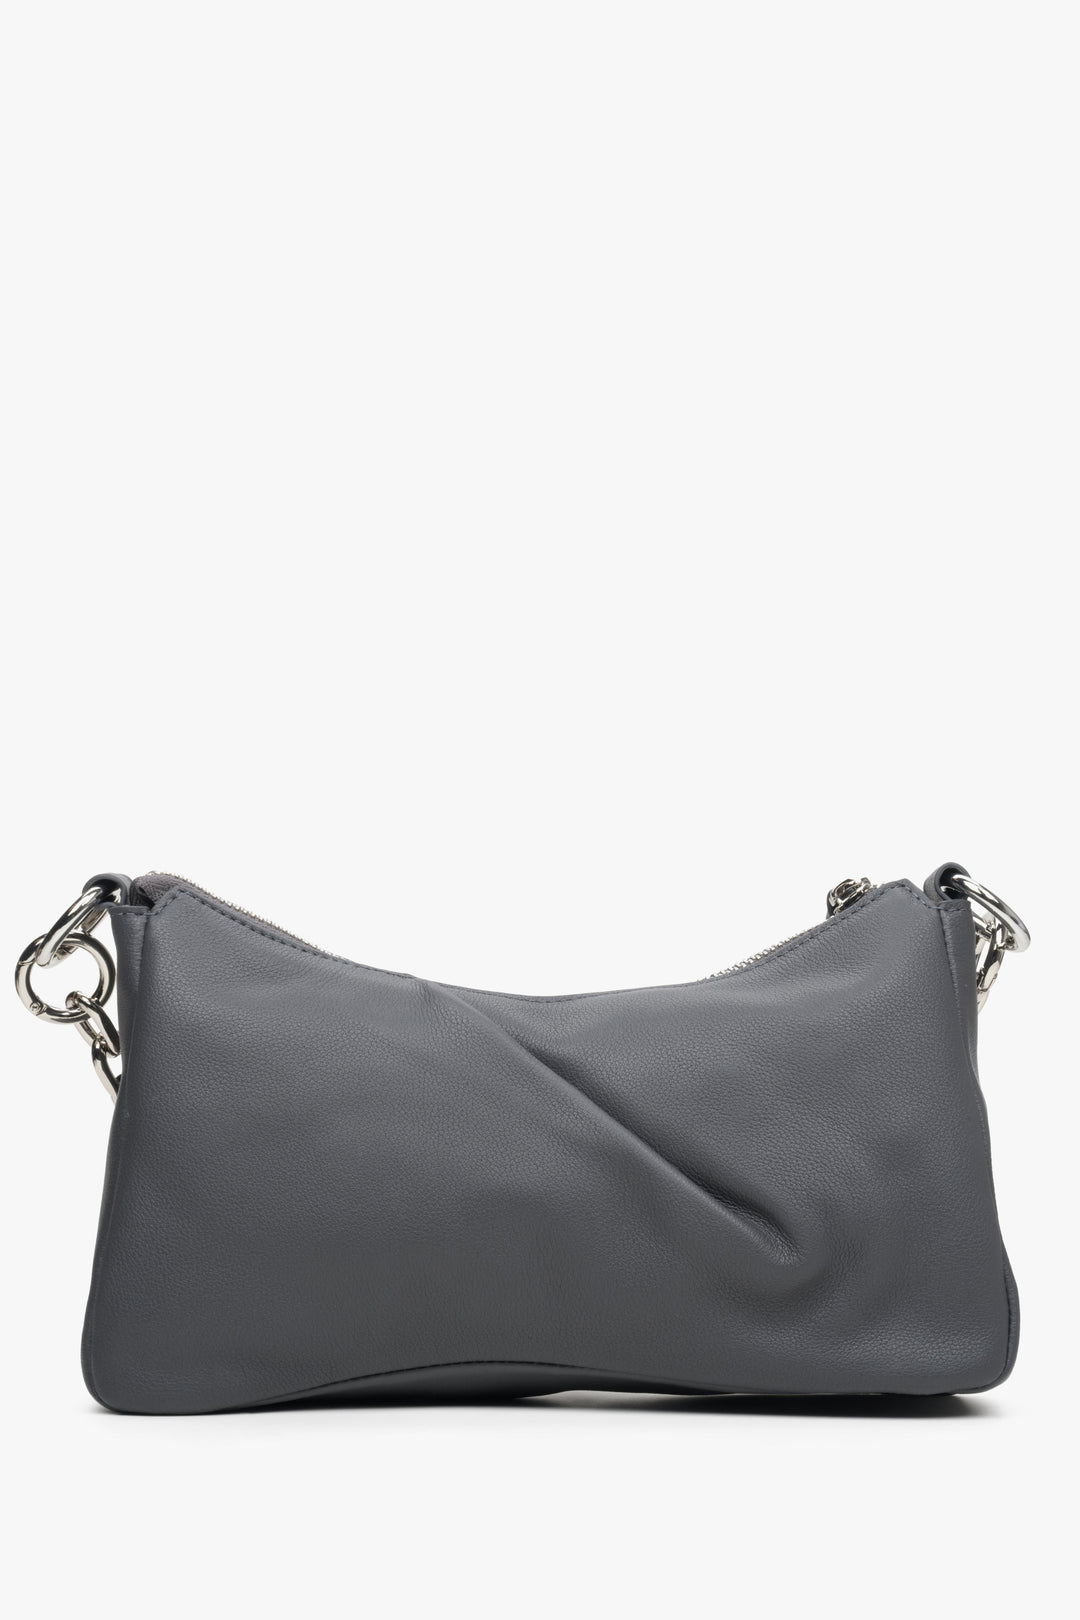 Estro's women's grey leather bag with a chain strap - reverse side.